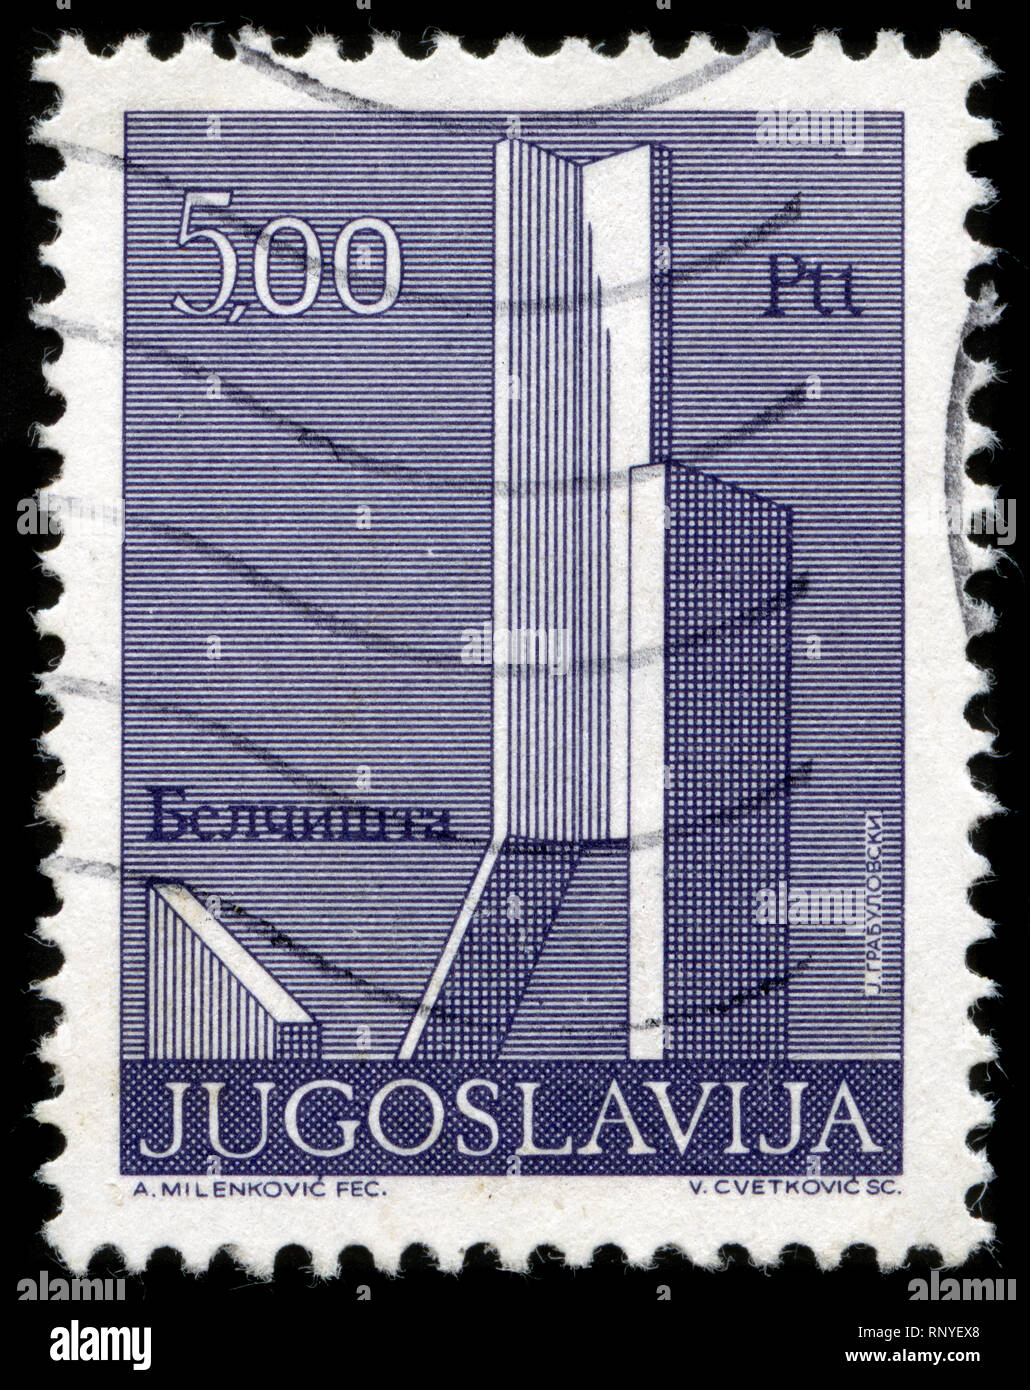 Postage stamp from the former state of Yugoslavia in the Revolution Monuments series issued in 1974 Stock Photo